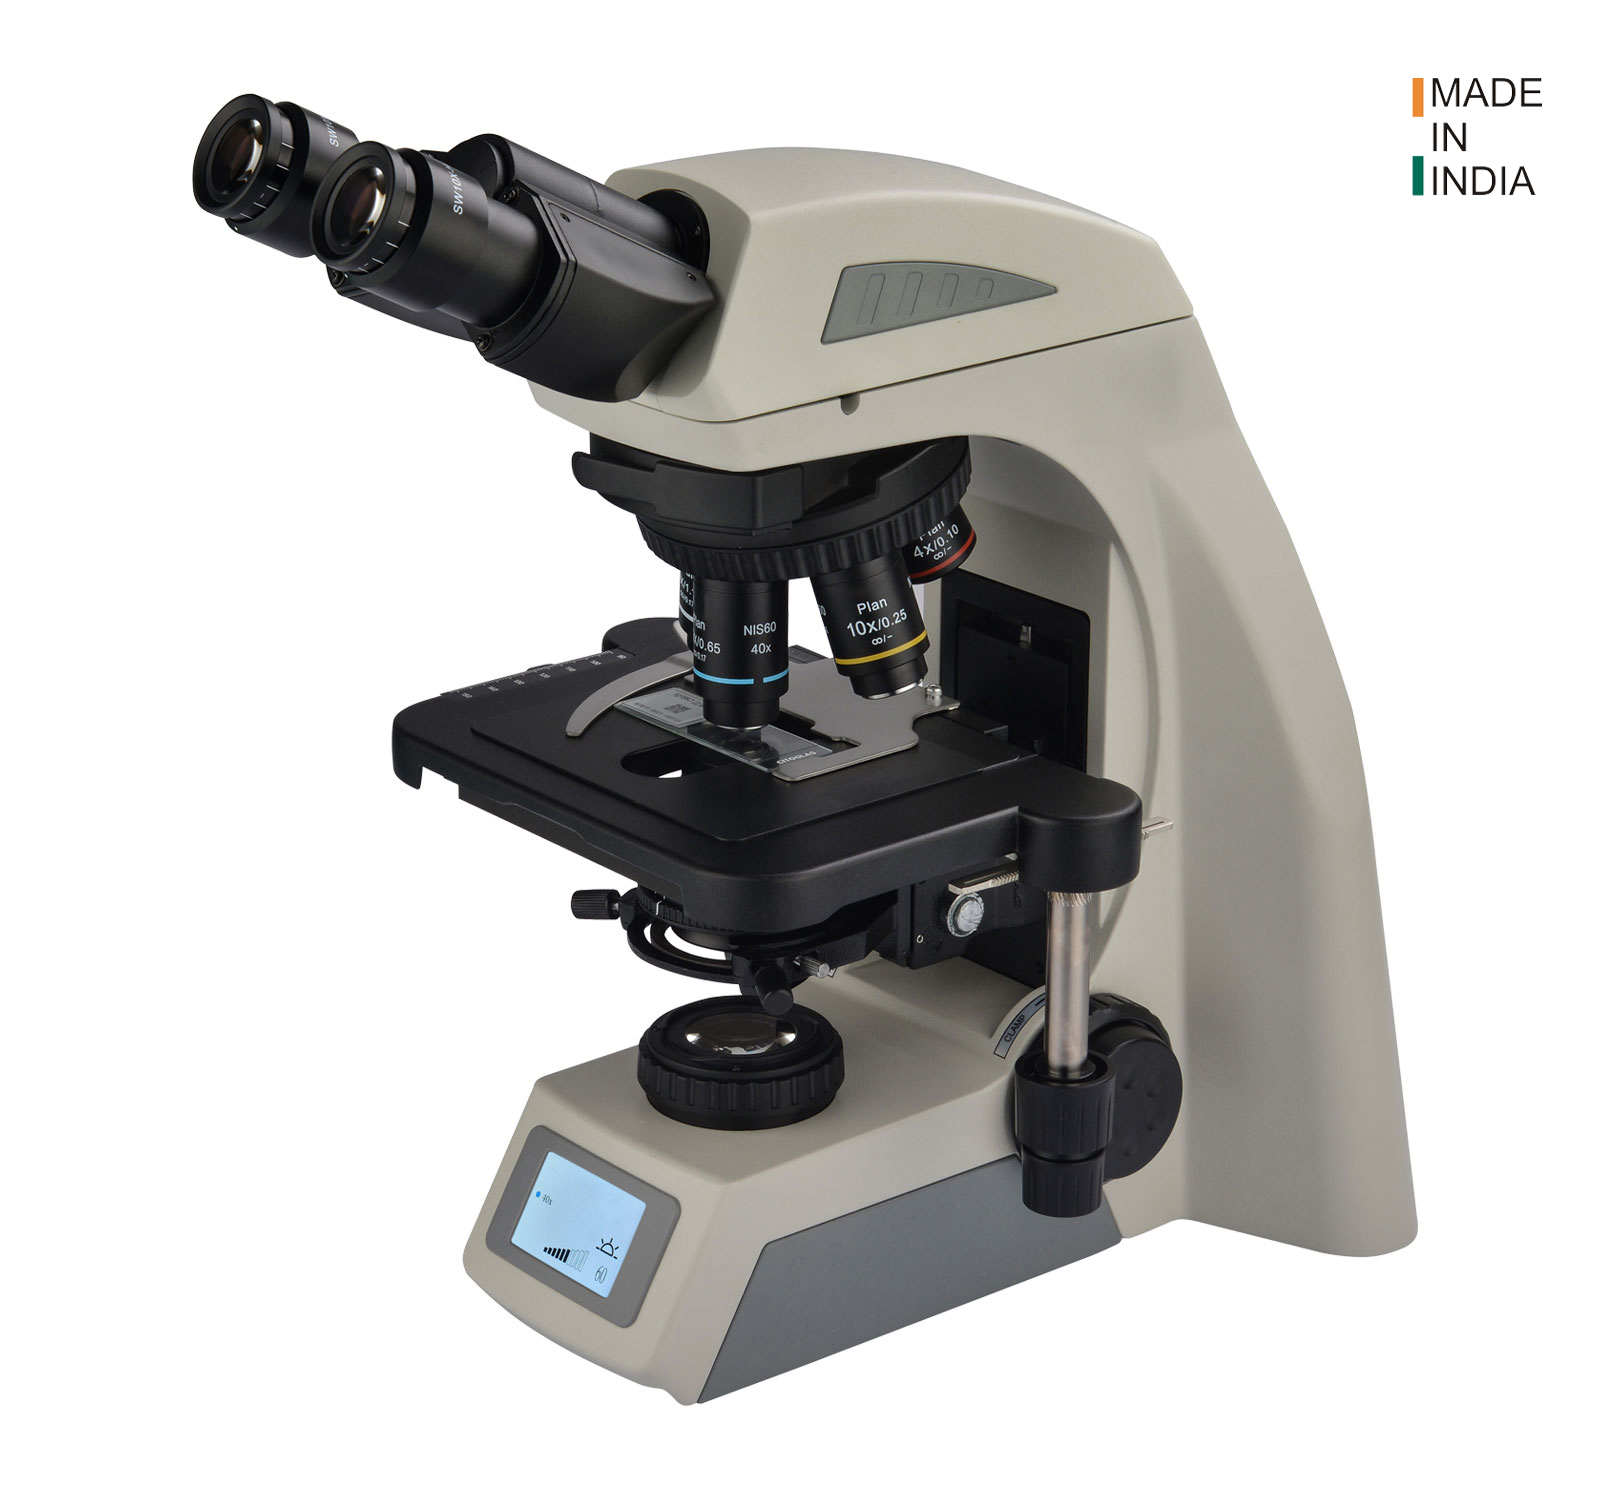 Radical Launches New Upright Microscope